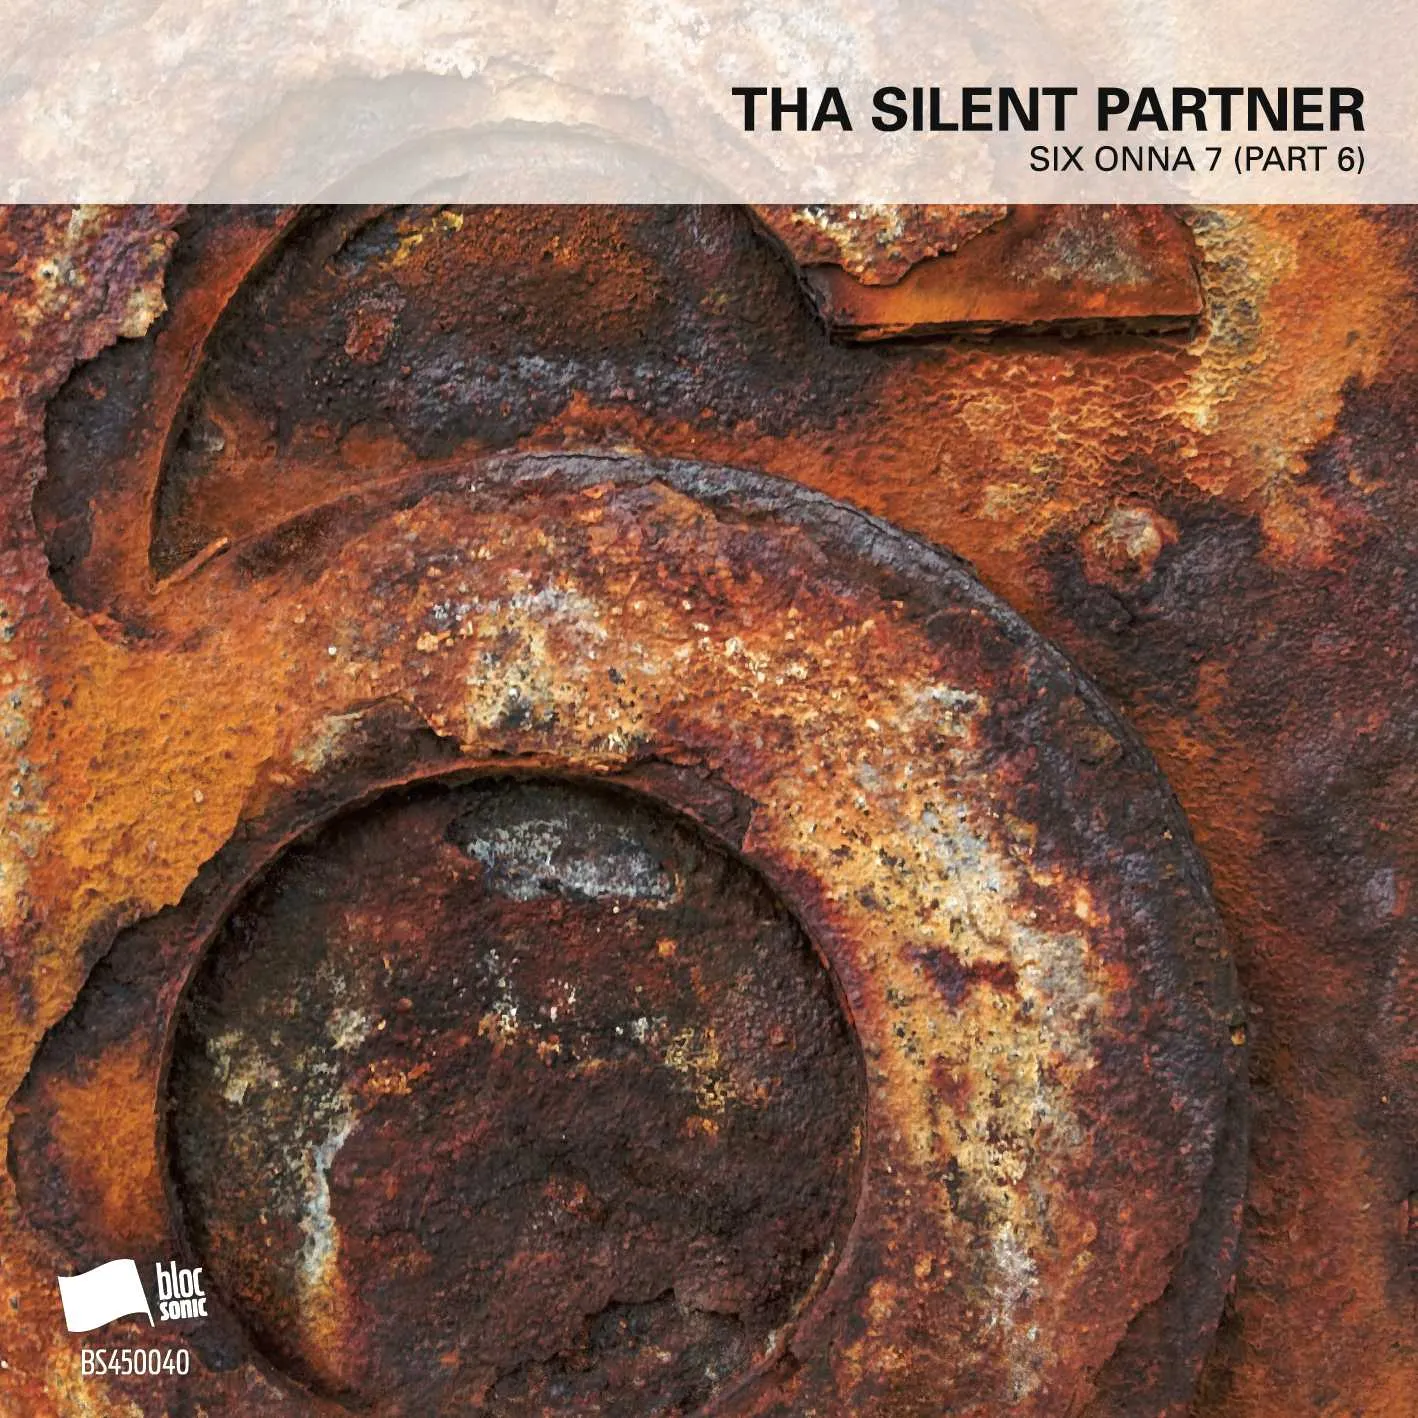 Album cover for “SIX ONNA 7 (Part 6)” by Tha Silent Partner